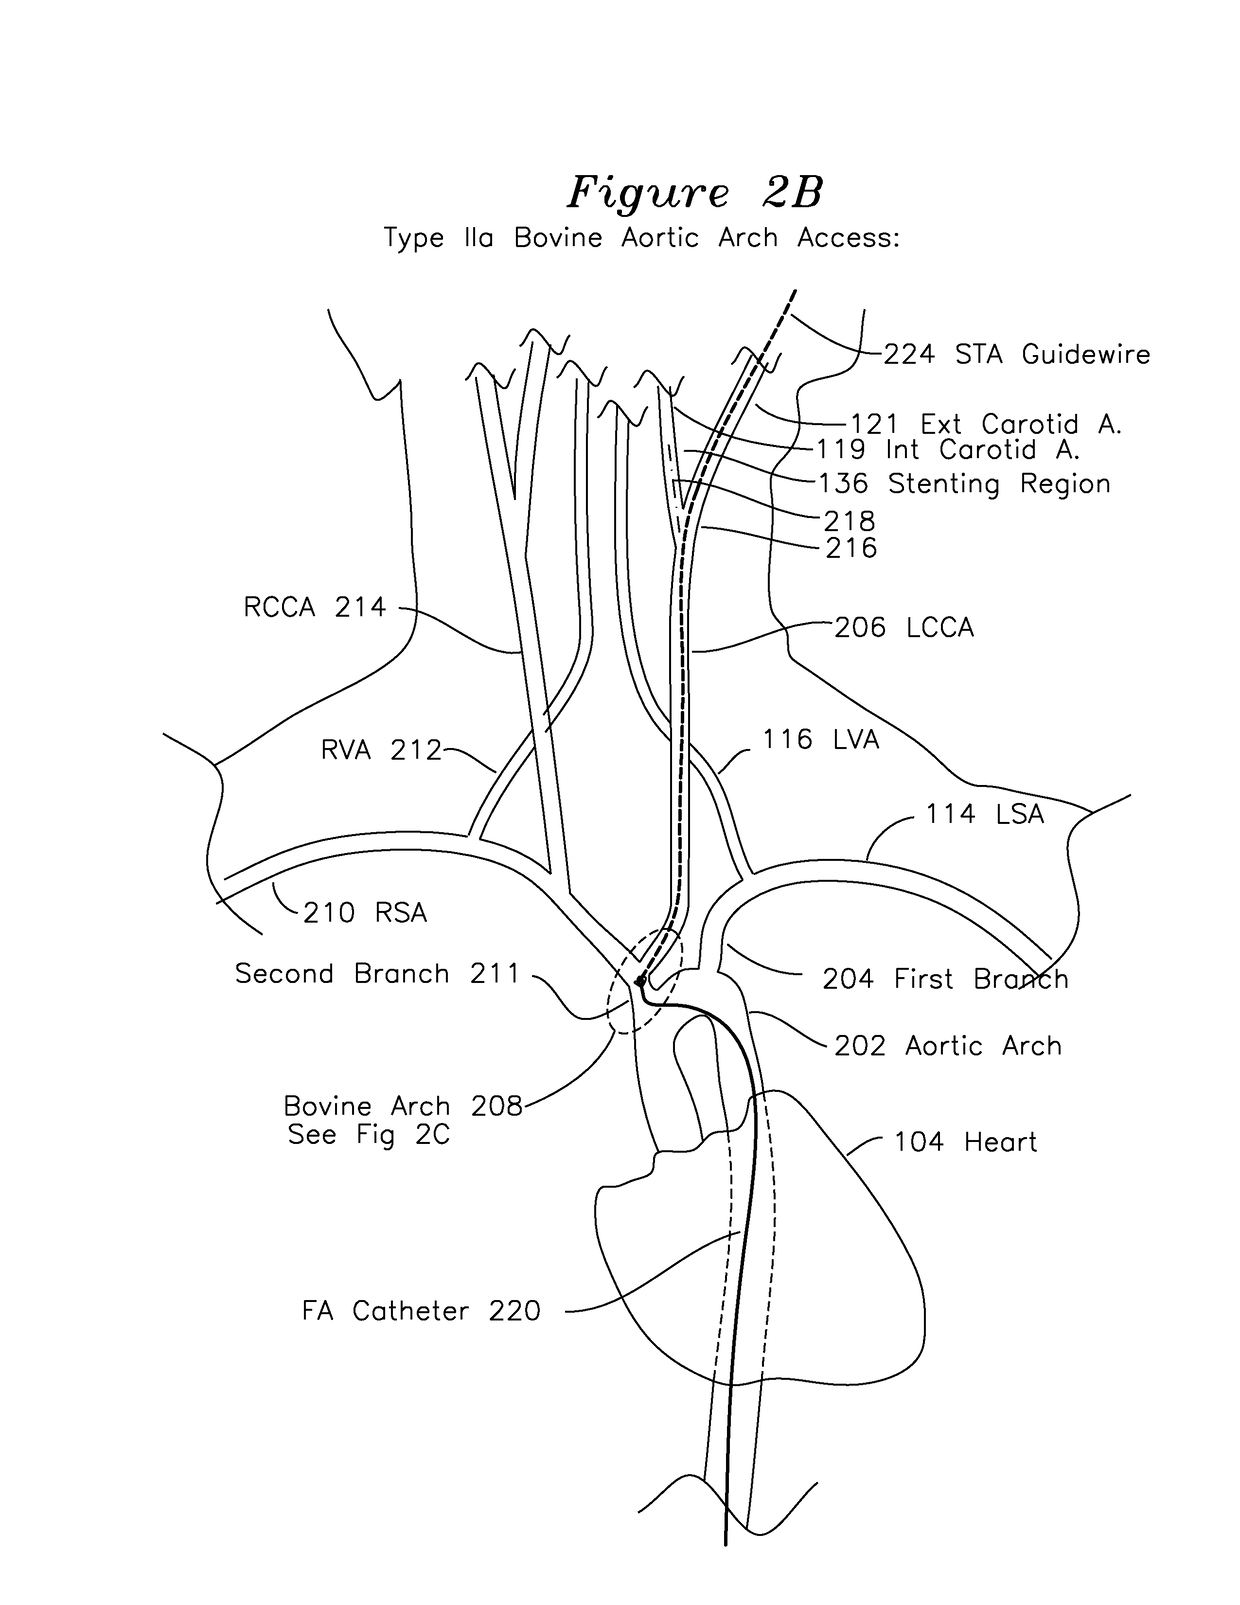 Method and apparatus for percutaneous superficial temporal artery access for carotid artery stenting